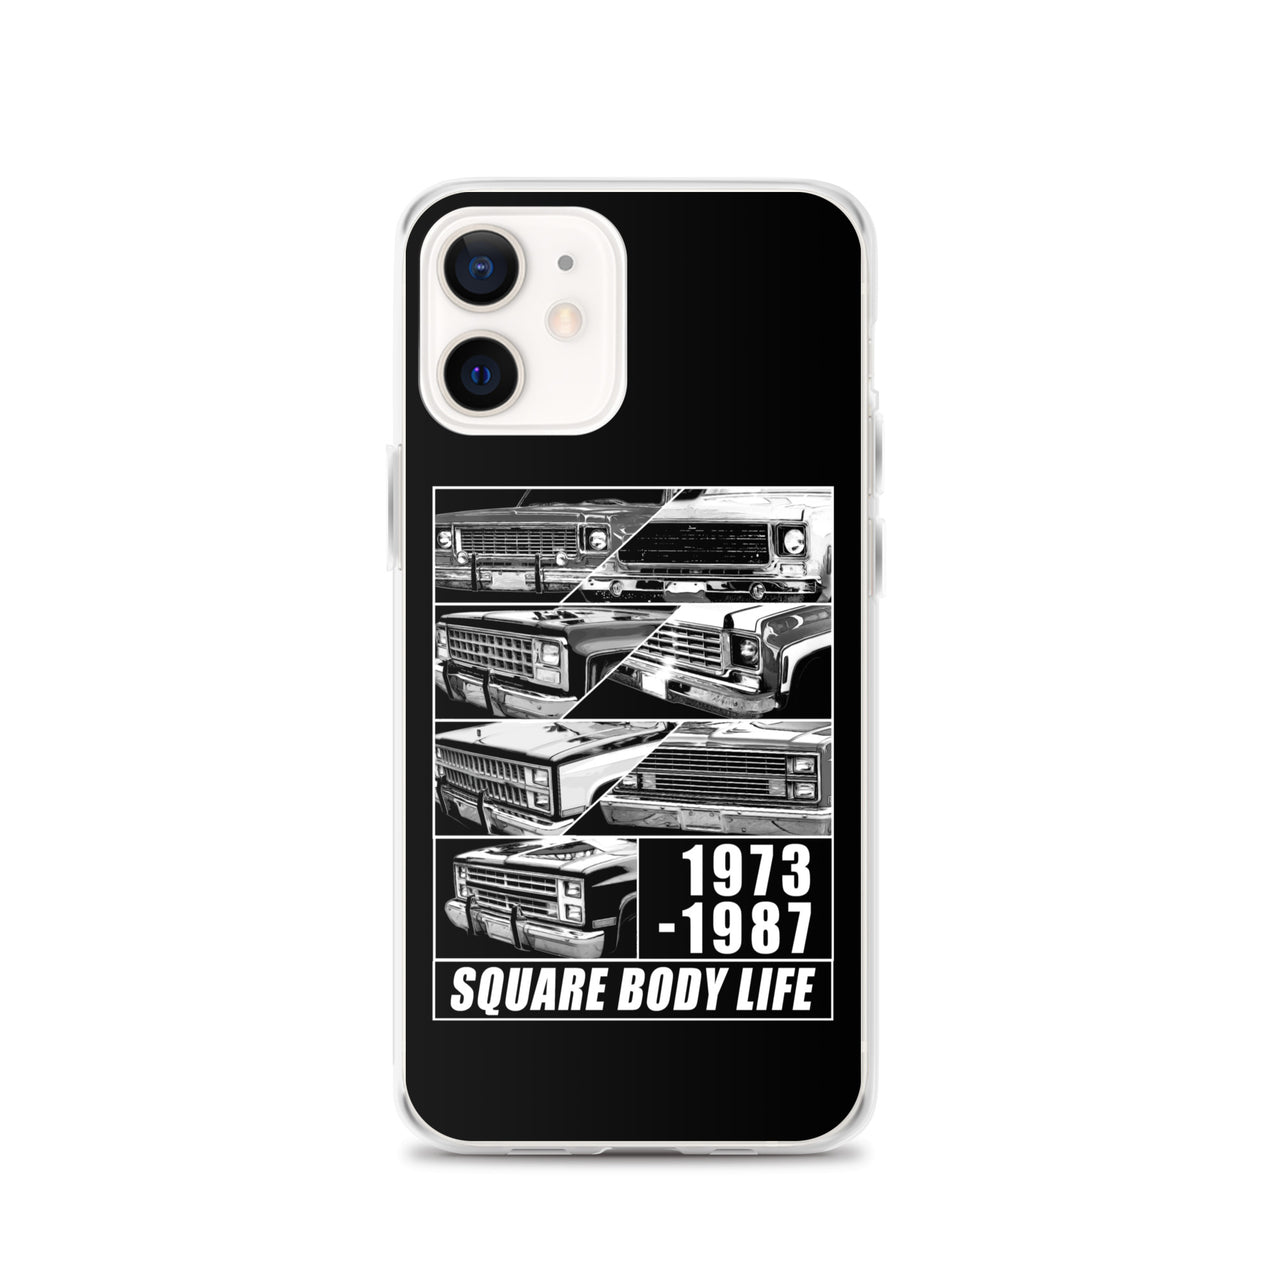 Square Body Truck Grilles Phone Case For iPhone 12 